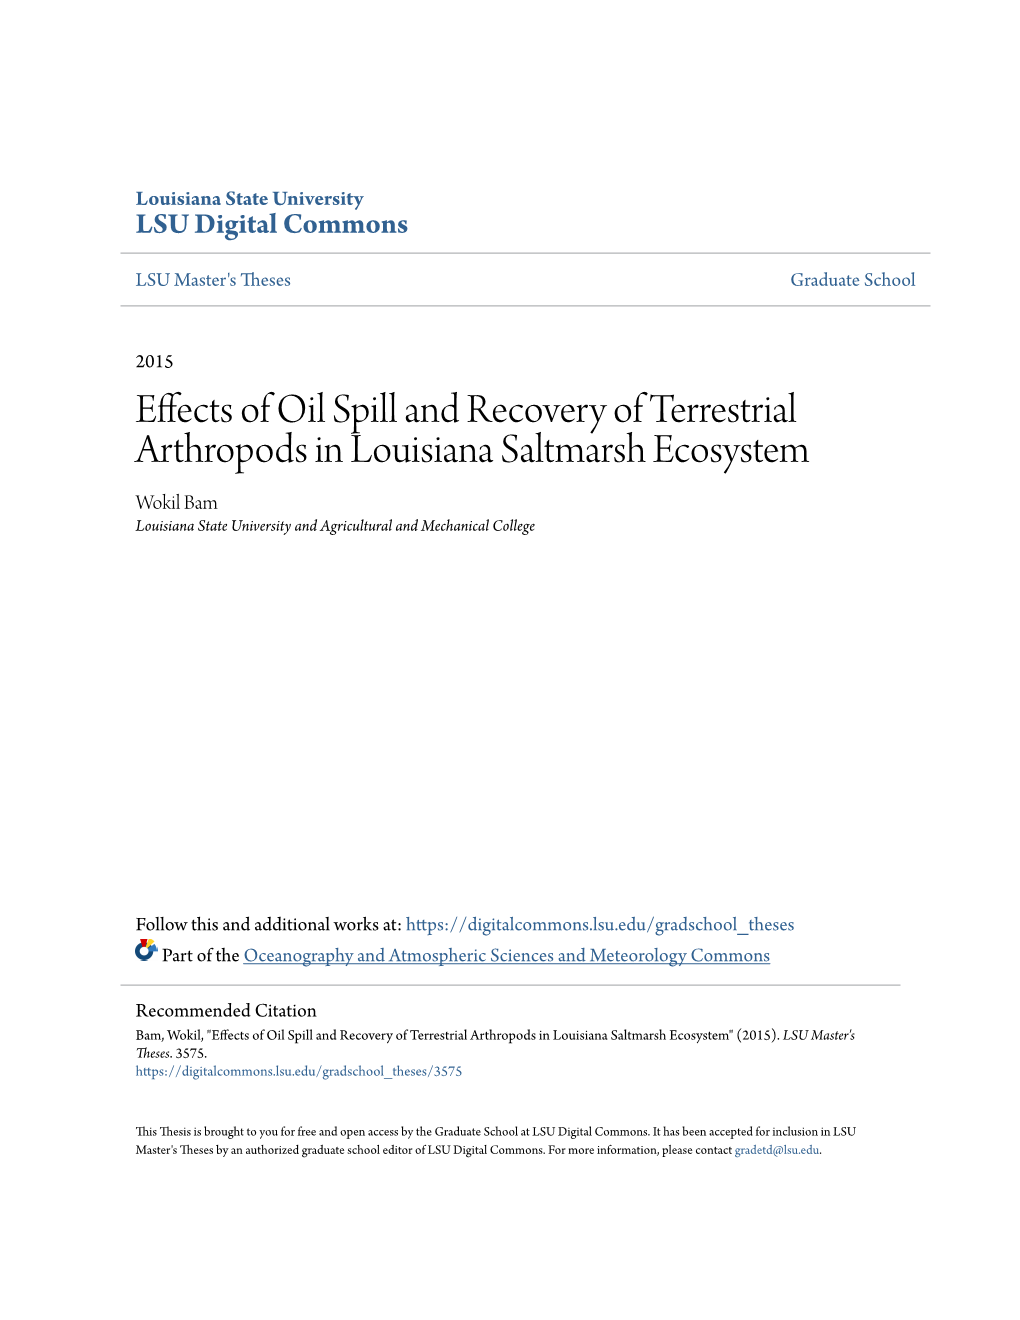 Effects of Oil Spill and Recovery of Terrestrial Arthropods in Louisiana